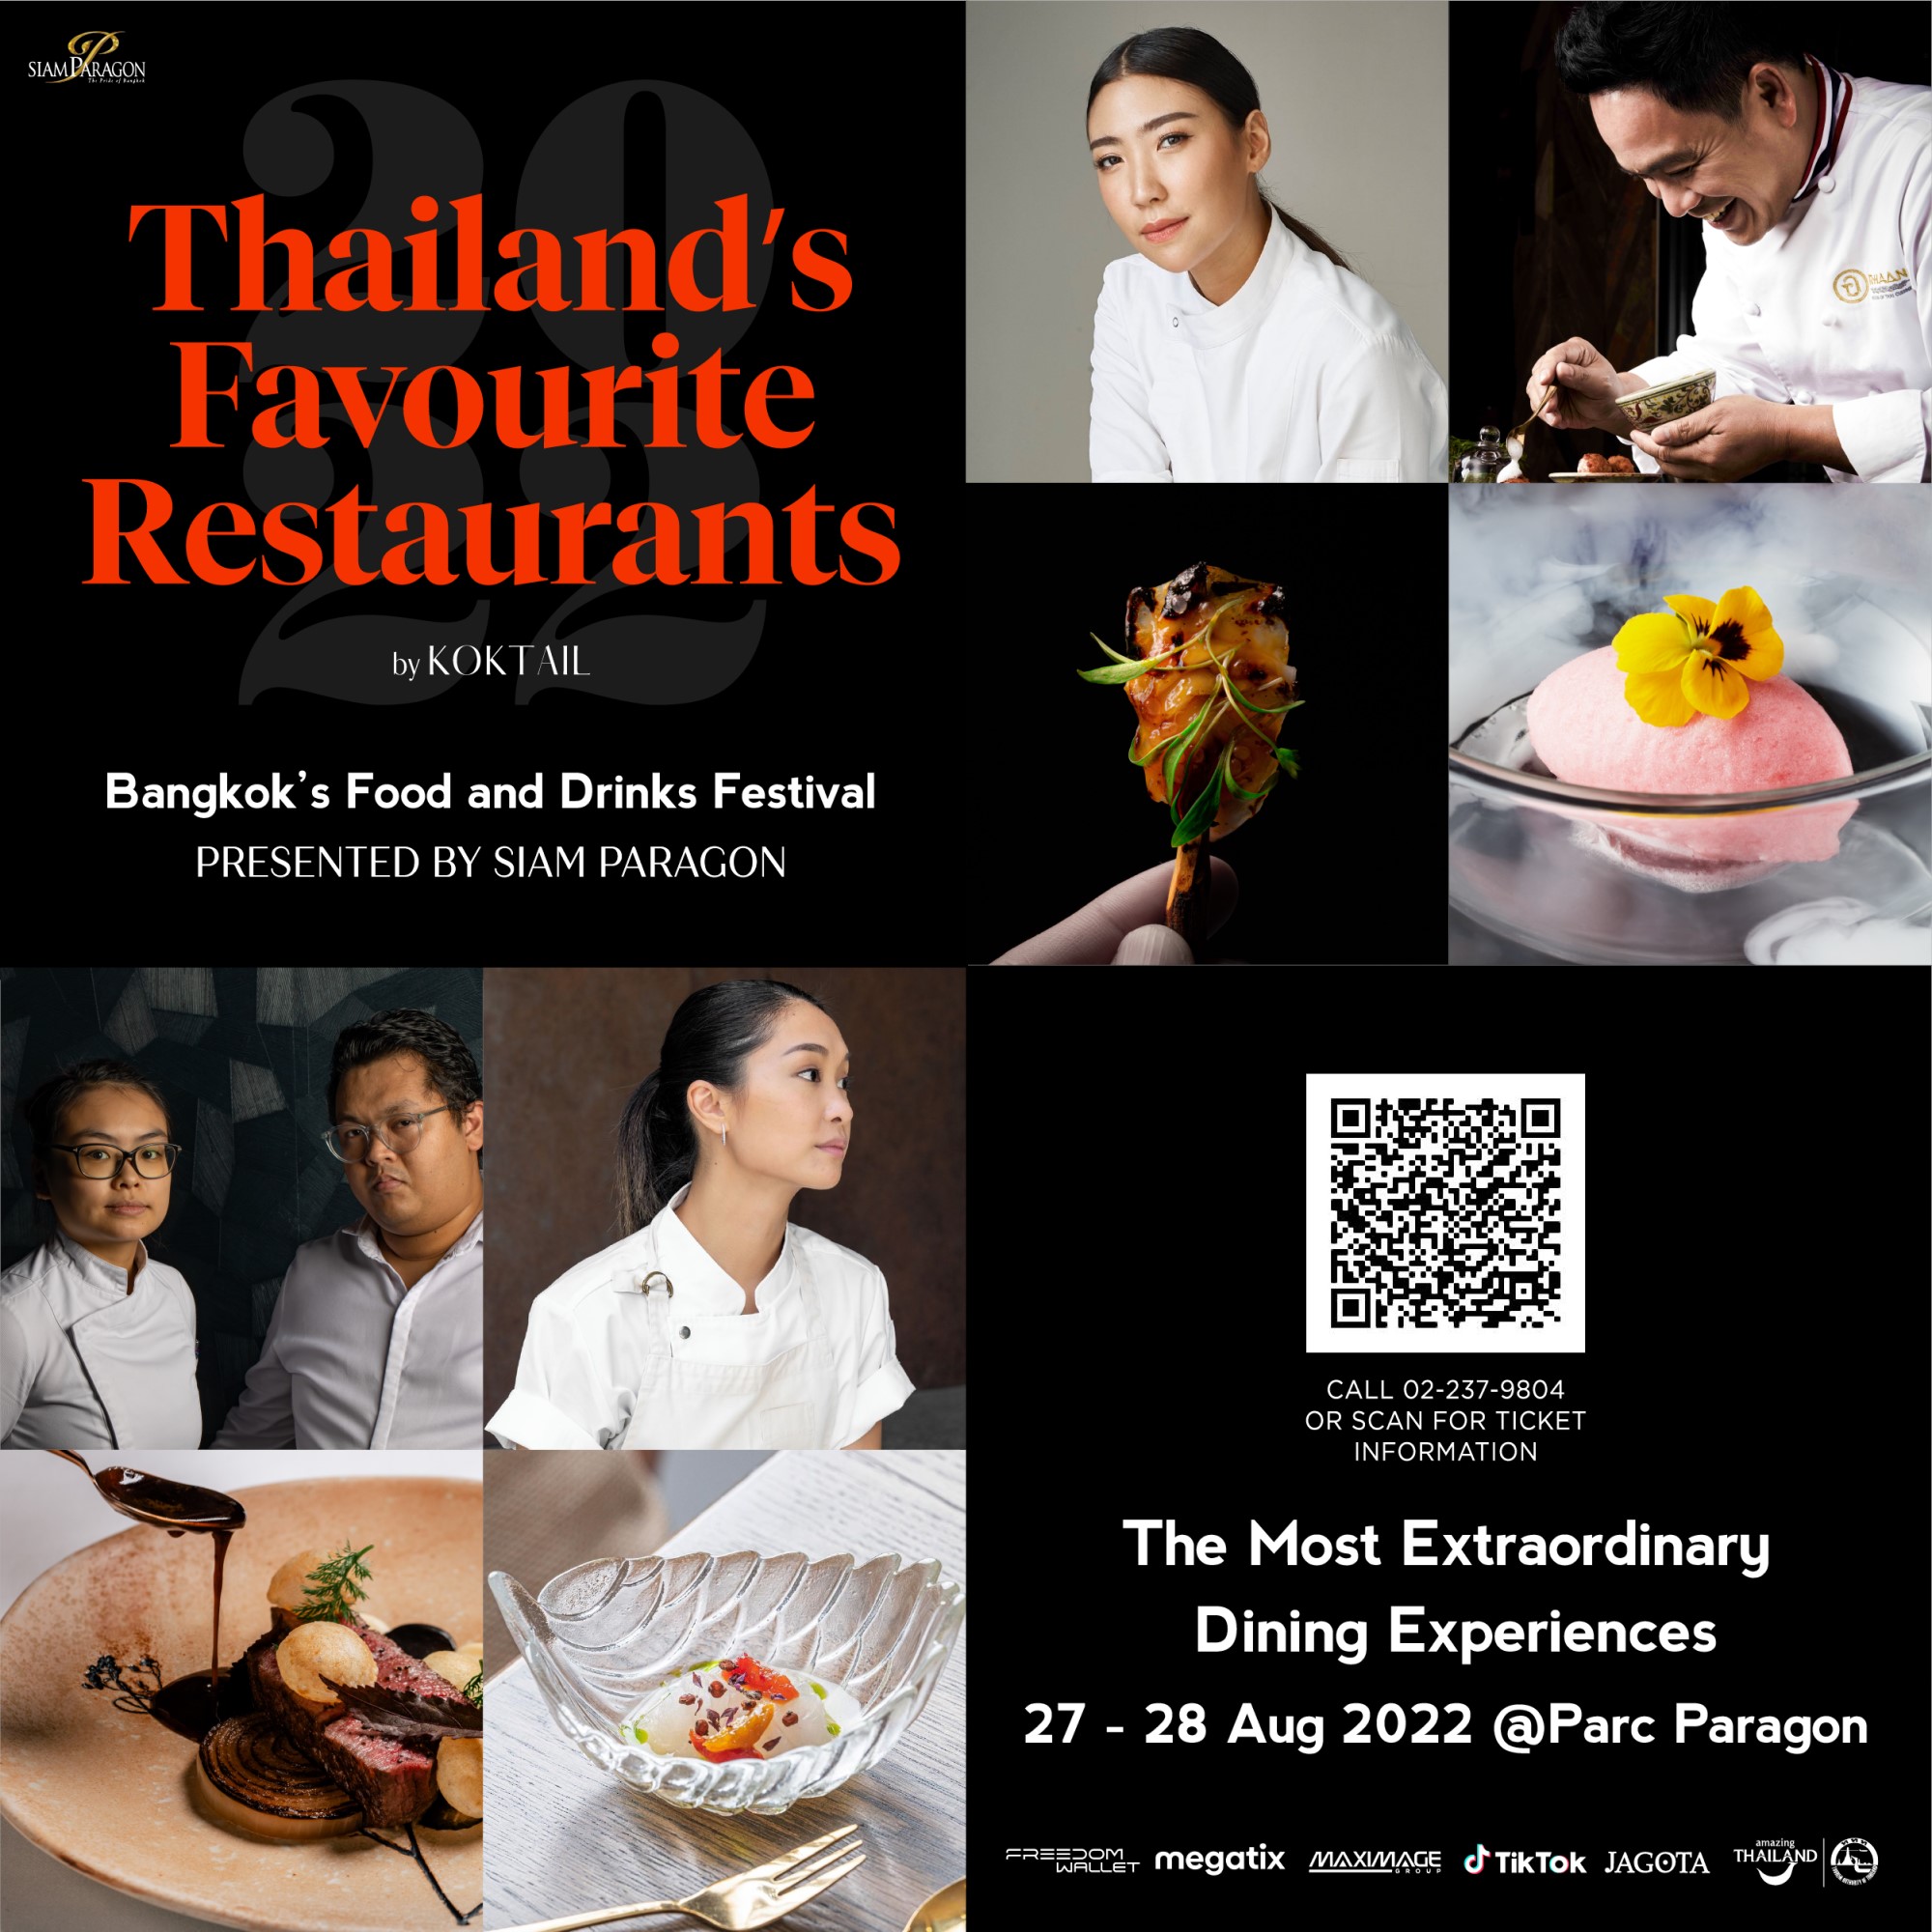 The culinary event of the year “Thailand’s Favourite Restaurants by Koktail Presented by Siam Paragon” at Parc Paragon in August 2022